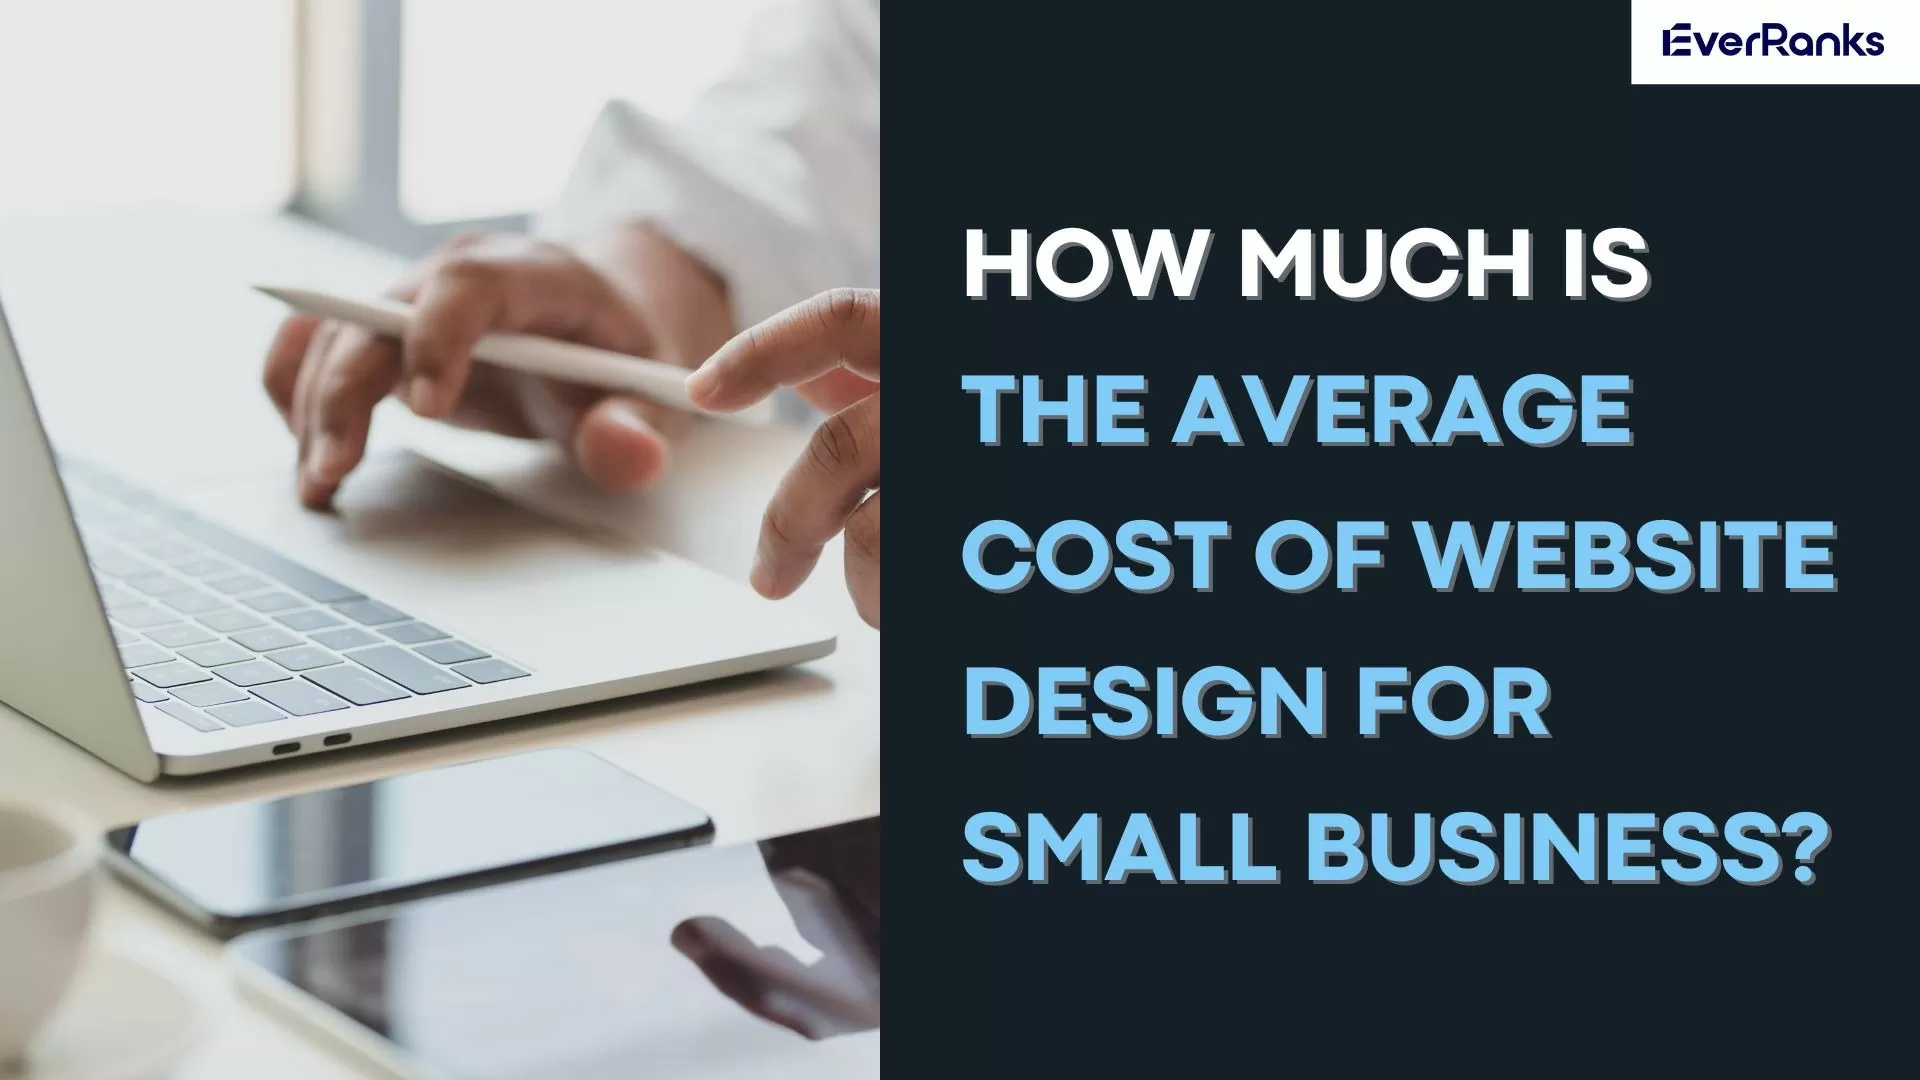 Creating a small business website no longer requires expensive development